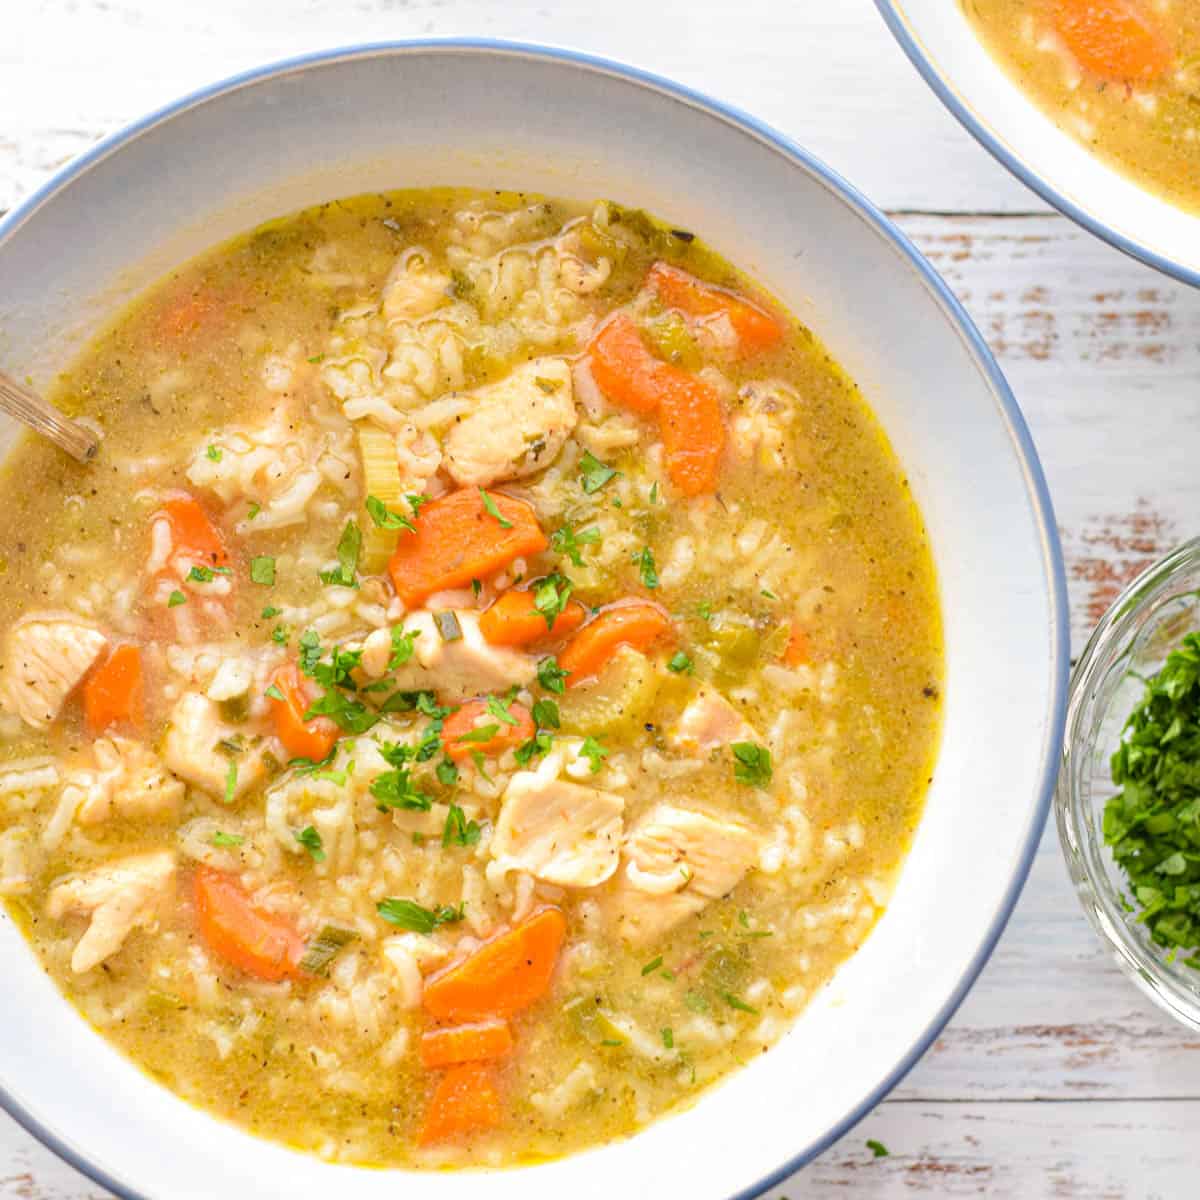 https://www.goodnomshoney.com/wp-content/uploads/2022/01/Low-FODMAP-Chicken-and-Rice-Soup-Gluten-Free-Dairy-Free-Featured-V2.jpg